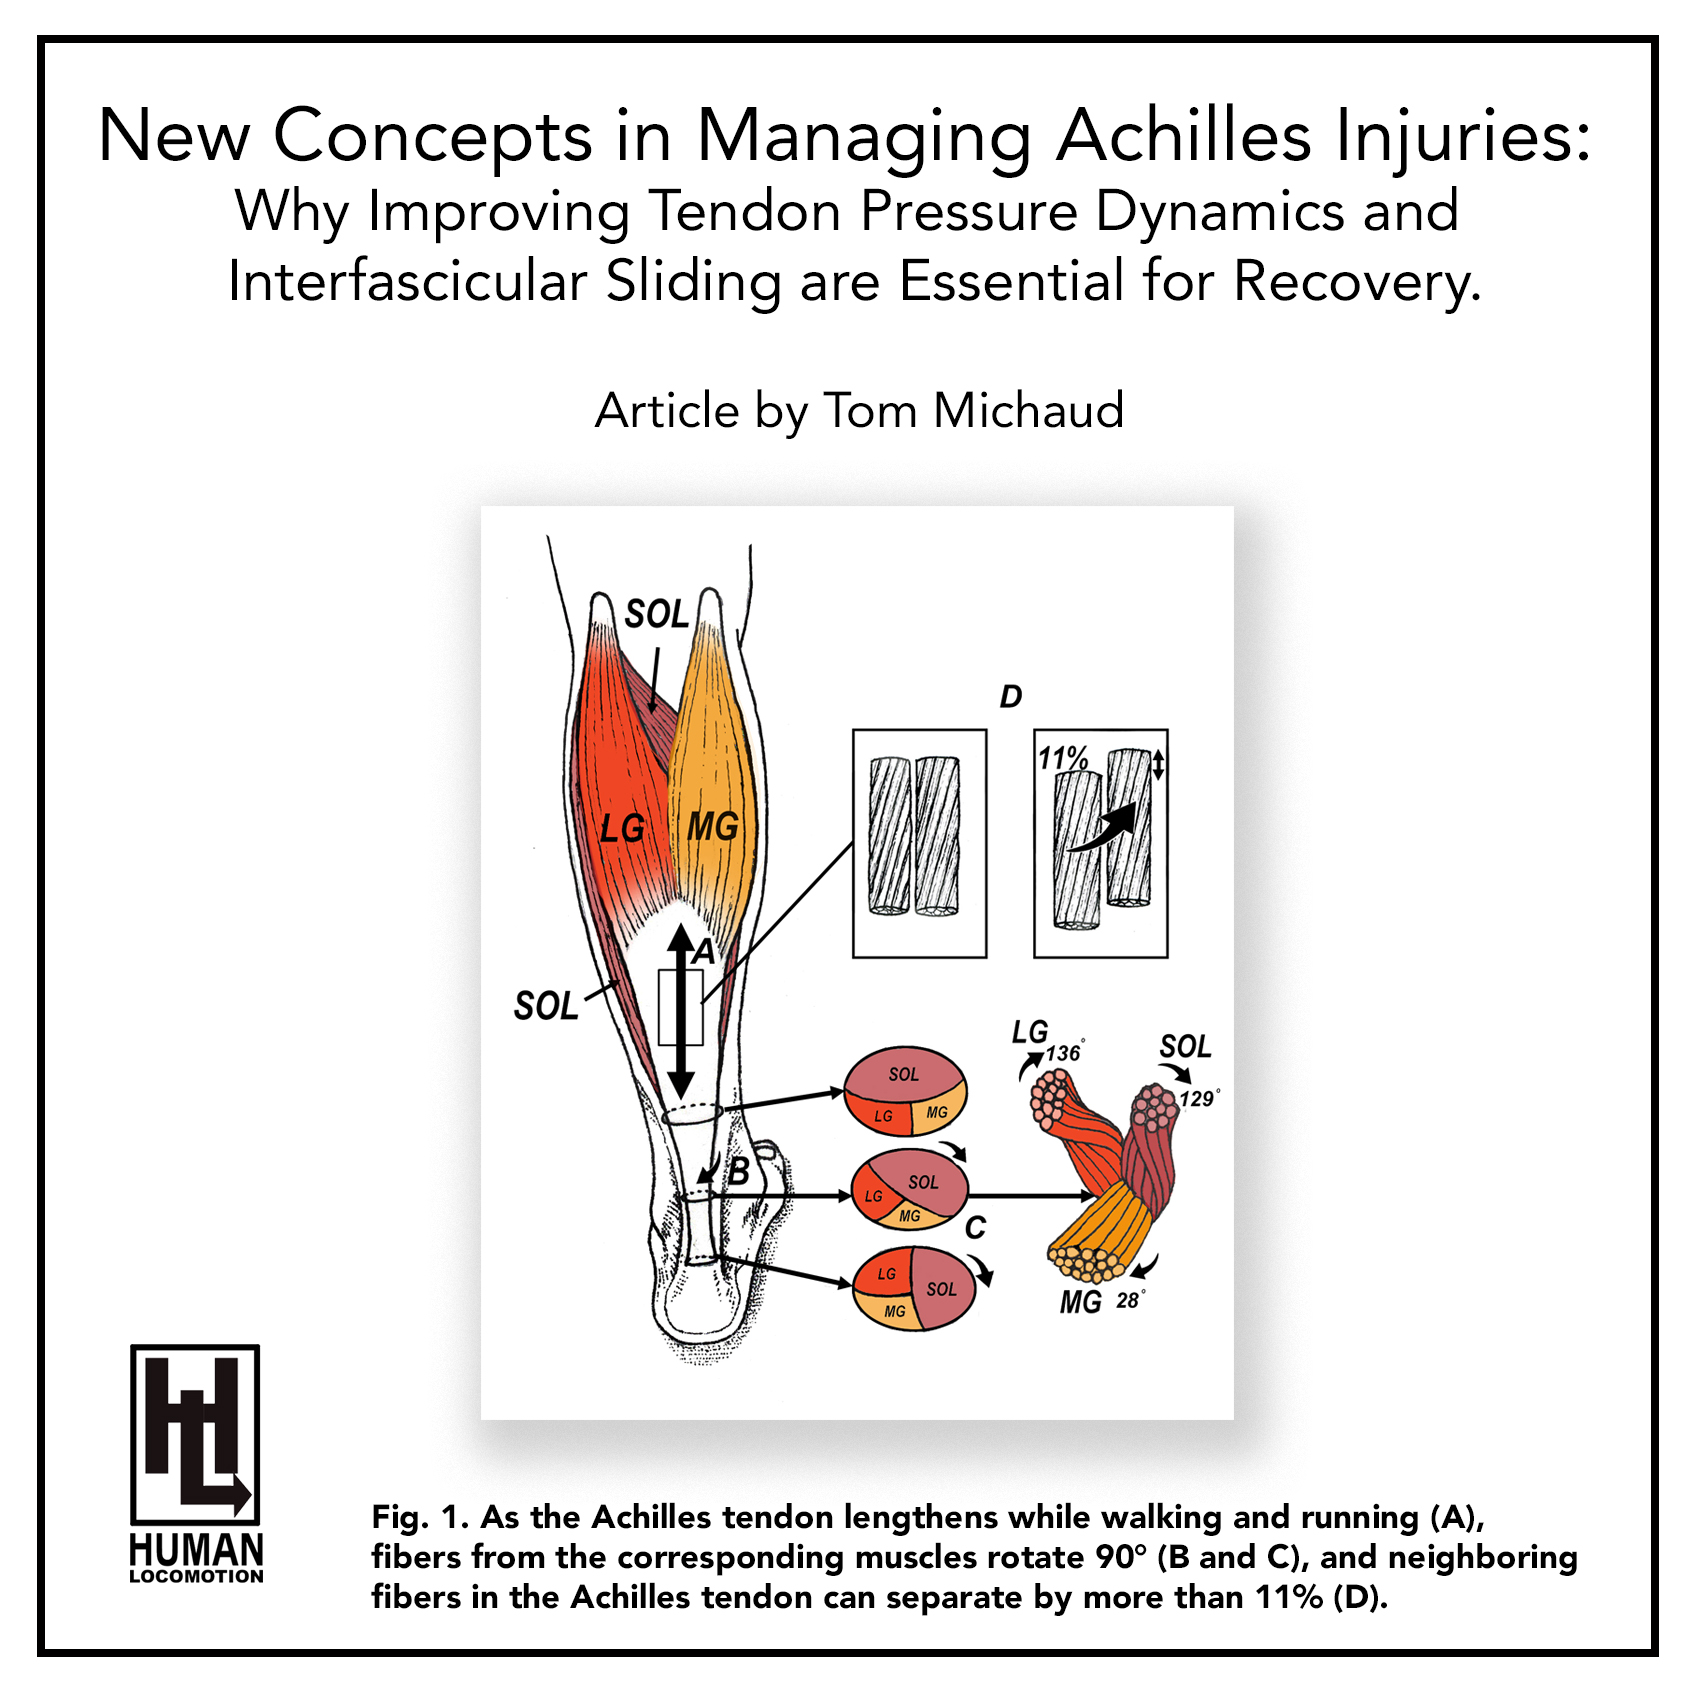 New Concepts in Managing Non-Insertional Achilles Injuries: Why Improving Tendon Pressure Dynamics and Interfascicular Sliding Are Essential for Recovery.